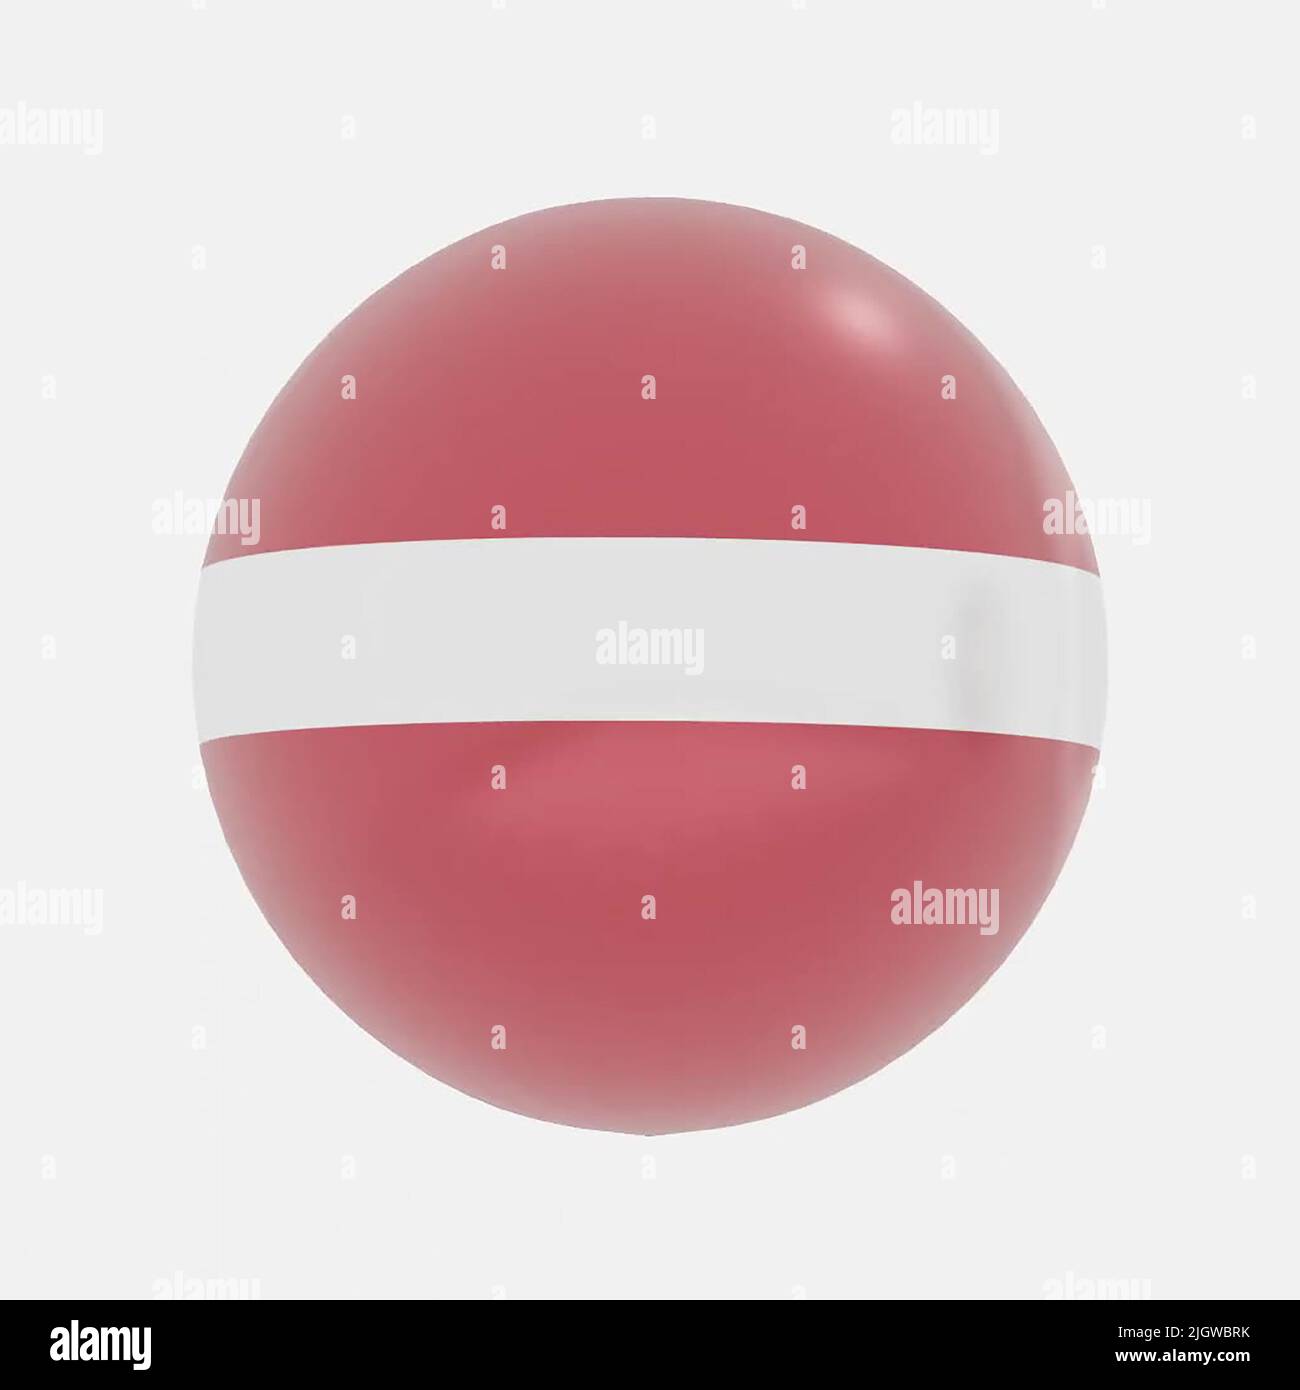 3d render of globe in Latvia flag for icon or symbol. Stock Photo